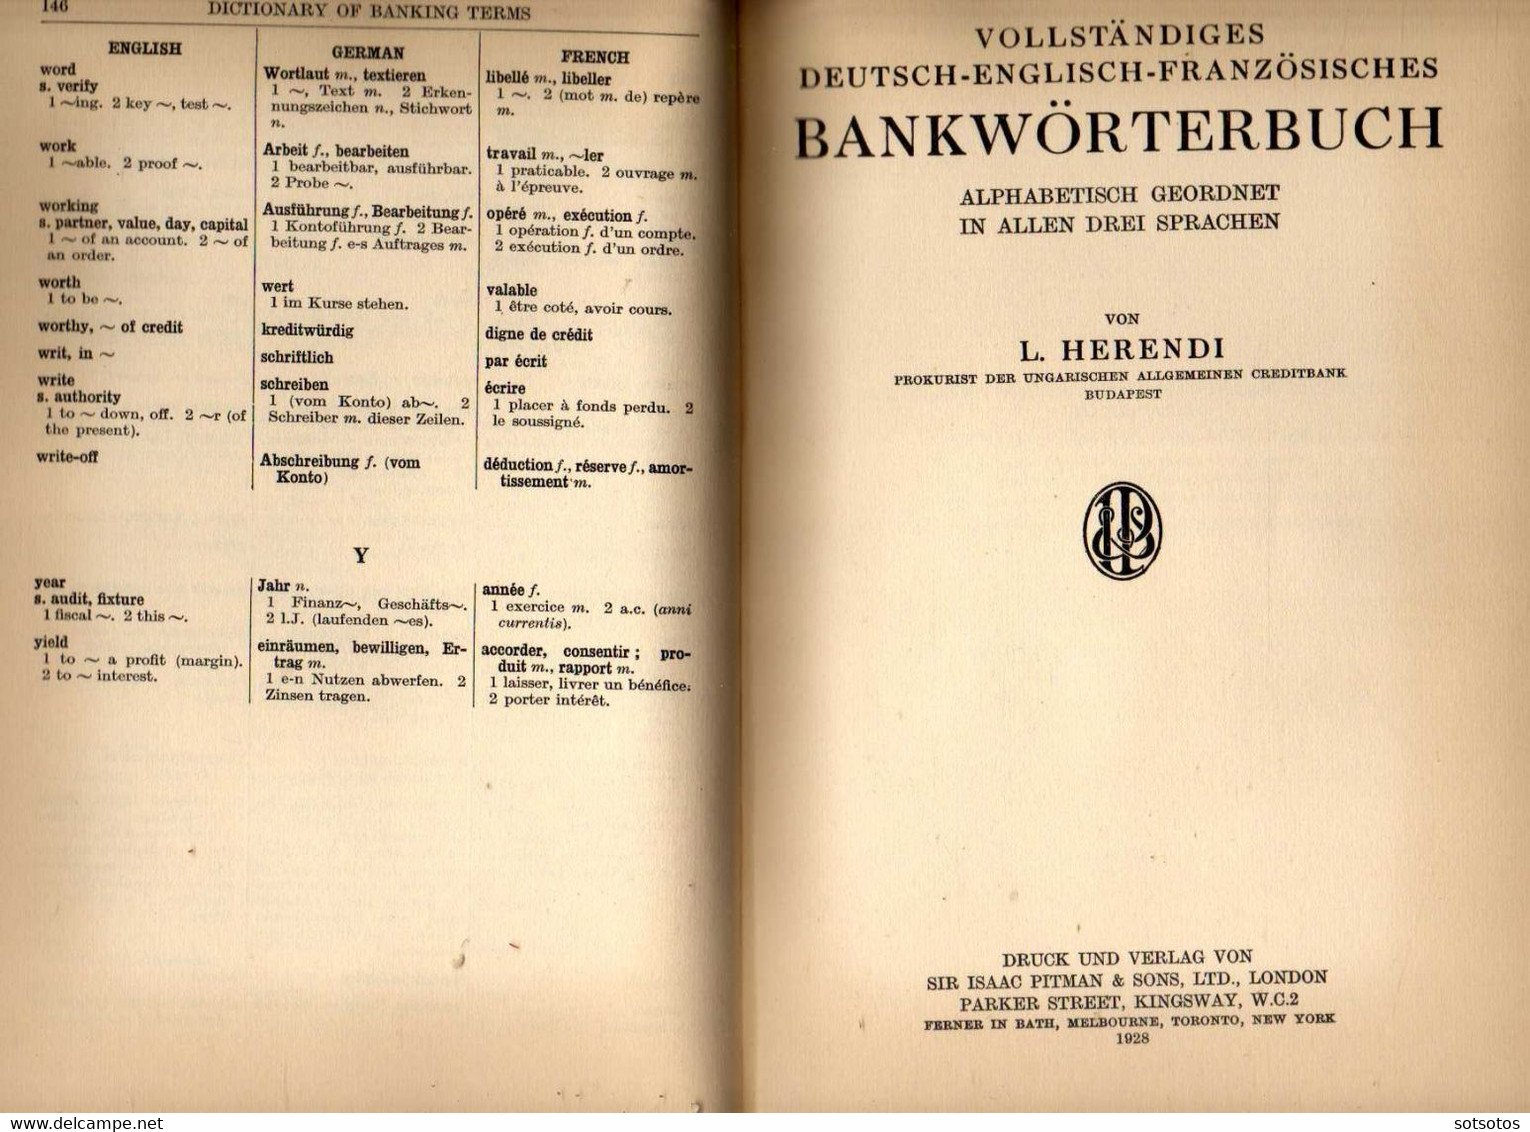 A complete Dictionary of Banking Terms in Three Languages (English – German – French) by L.  Herendi